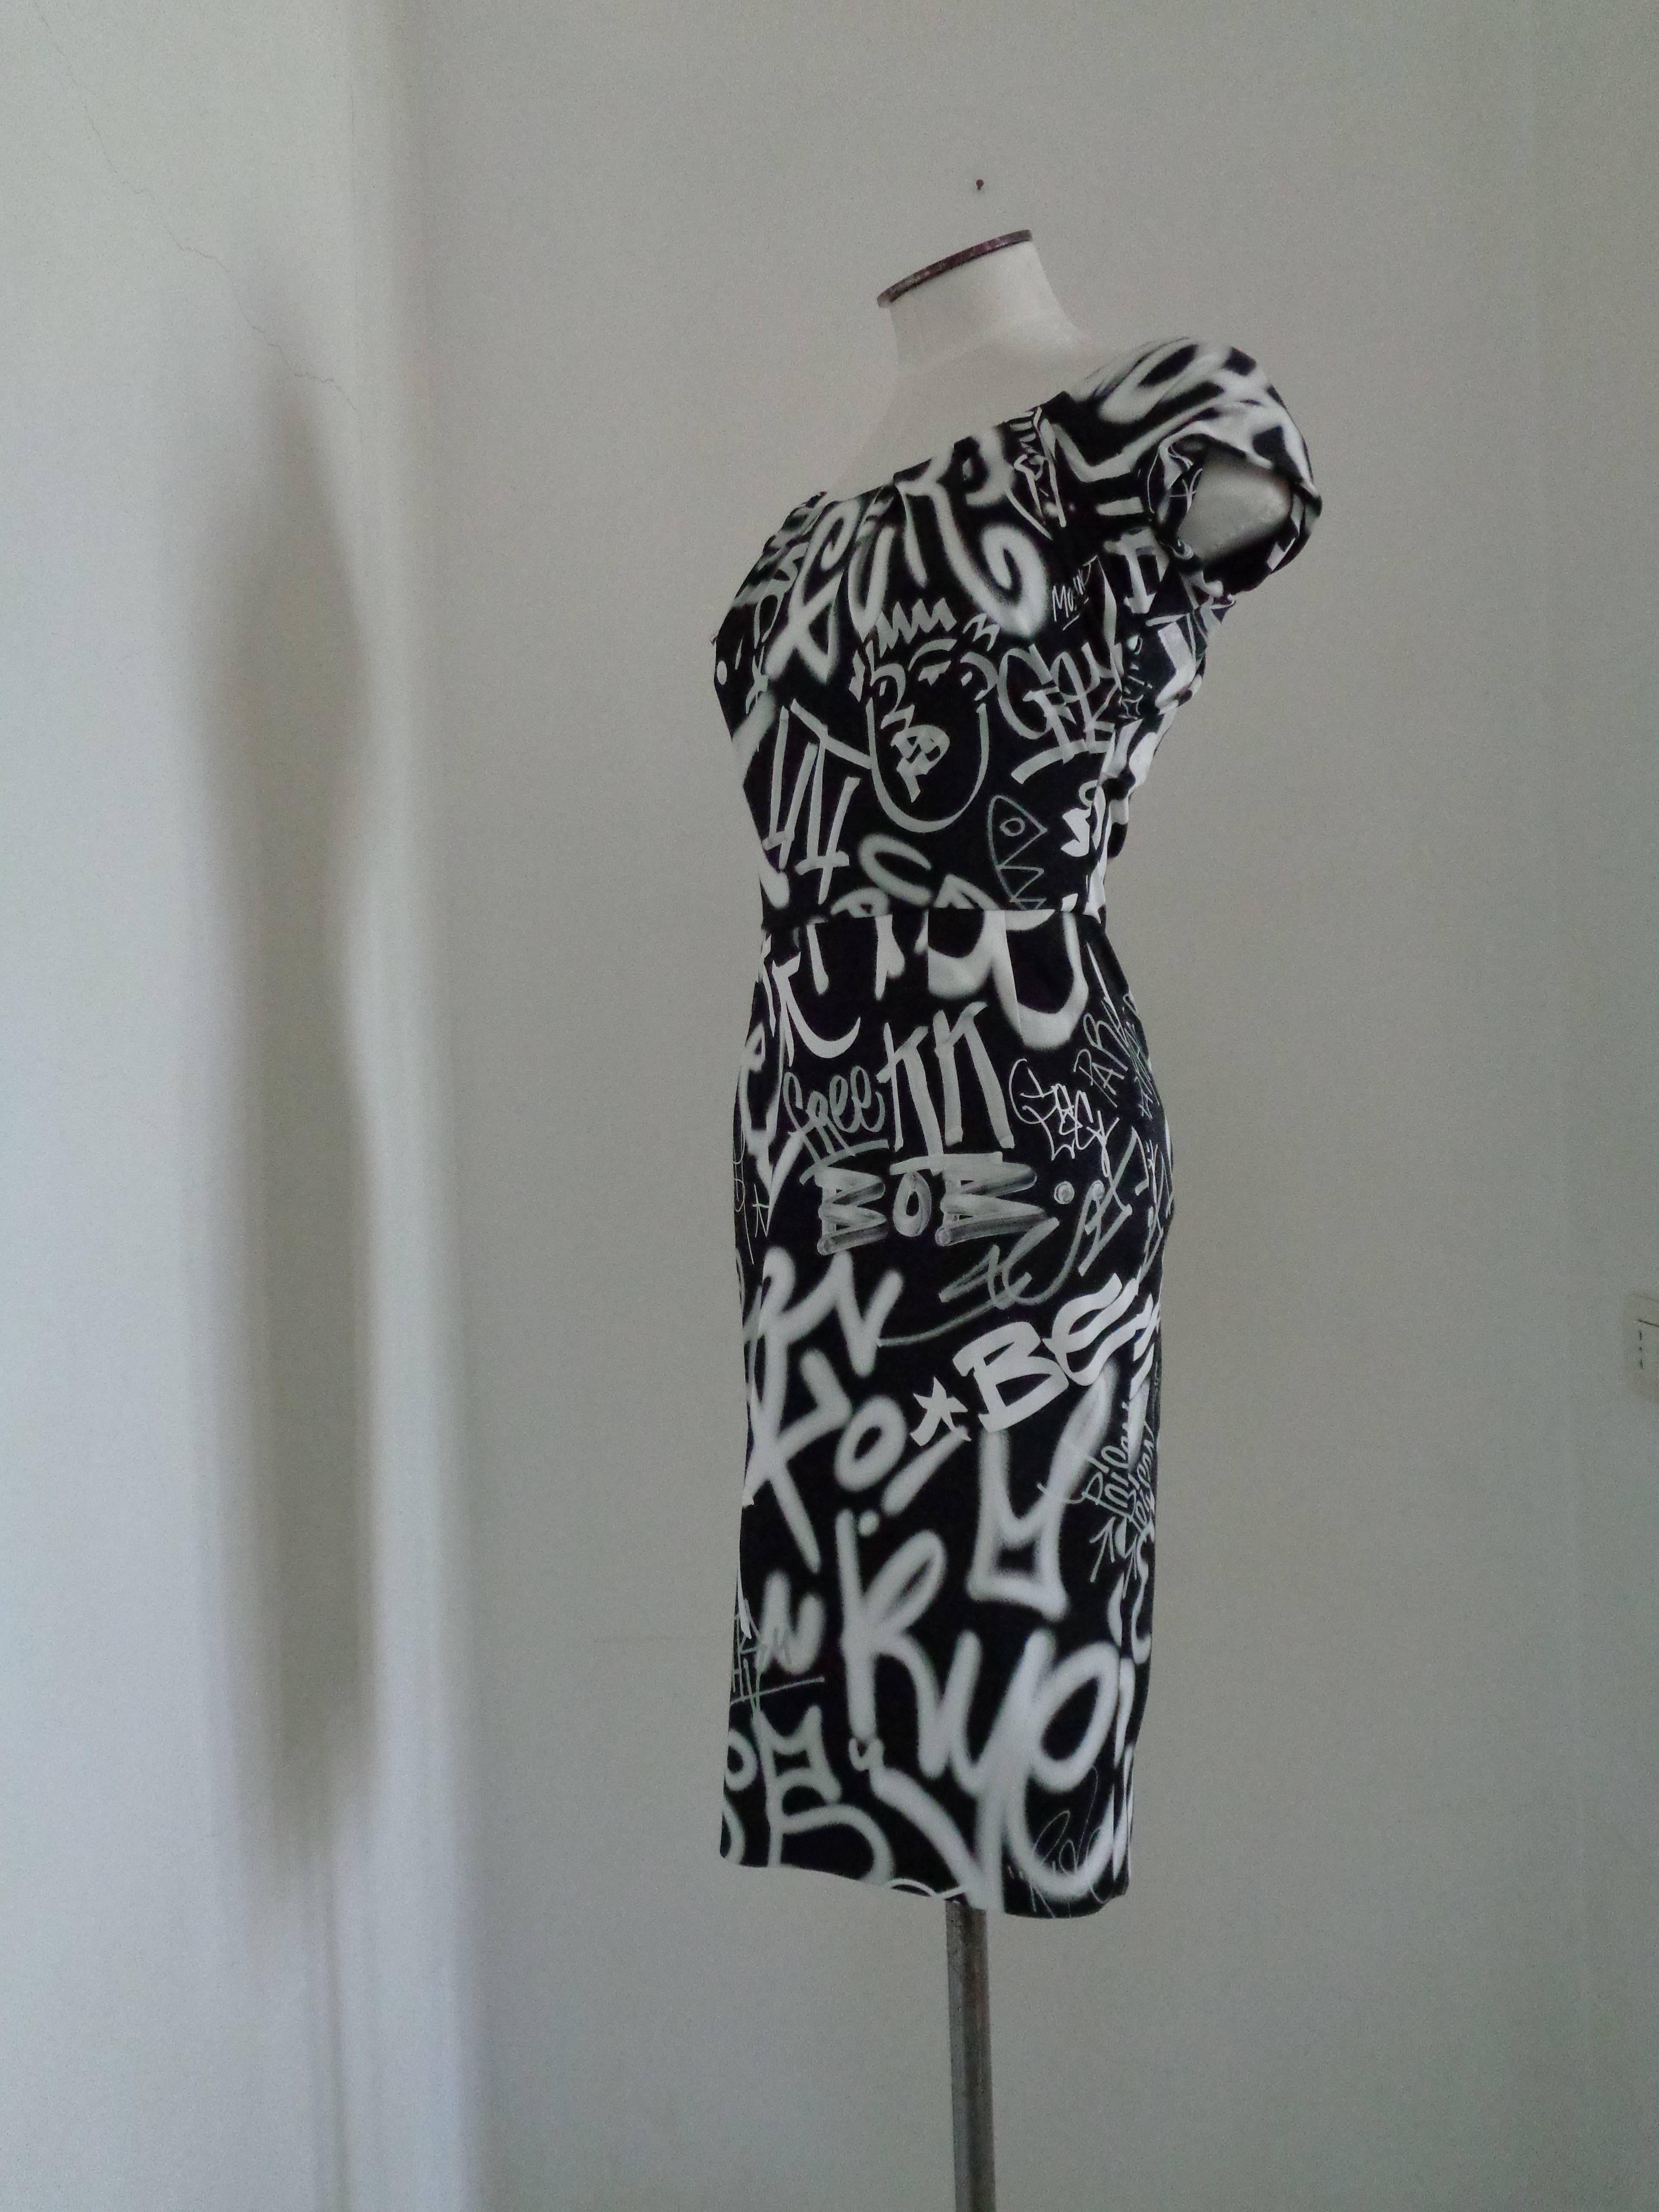 Moschino Couture Black White Graffiti Dress NWOT

Black and white graffiti print dress from Moschino featuring a scoop neck, short sleeves, a concealed rear zip fastening and a fitted waist.
Size 38 in italian size range
Retail Price: 1762 €
Lining